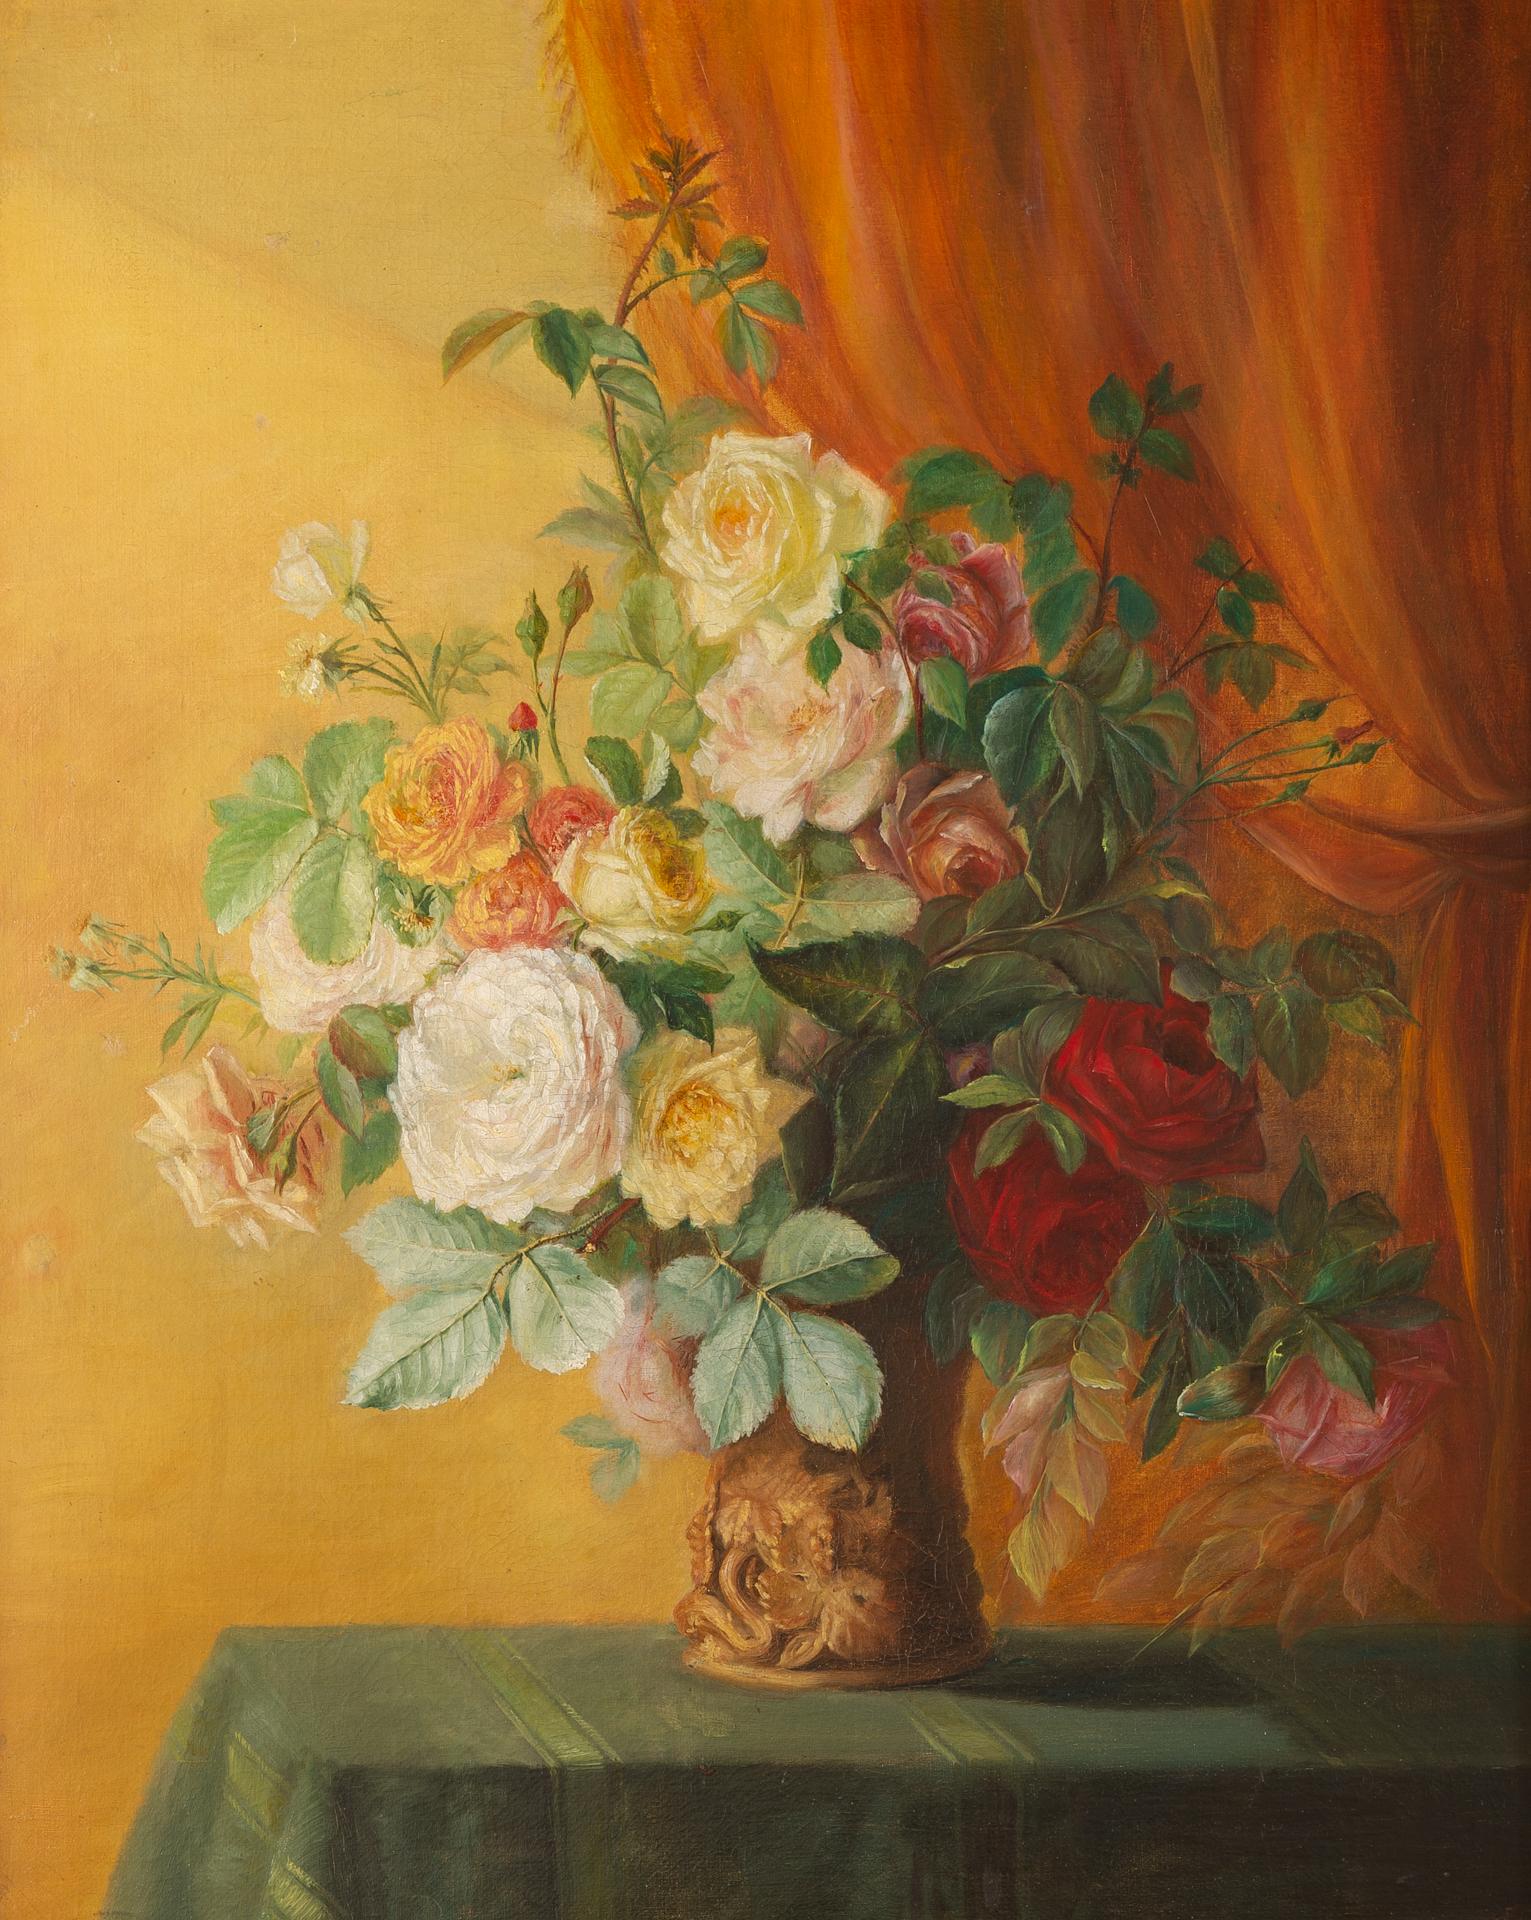 O/3890 - Illegible signature for this painting on canvas.
With this picture You will always have flowers at home: maybe You could even smell the scent of roses....
The painting has been relined, but let's not forget that were two world wars in